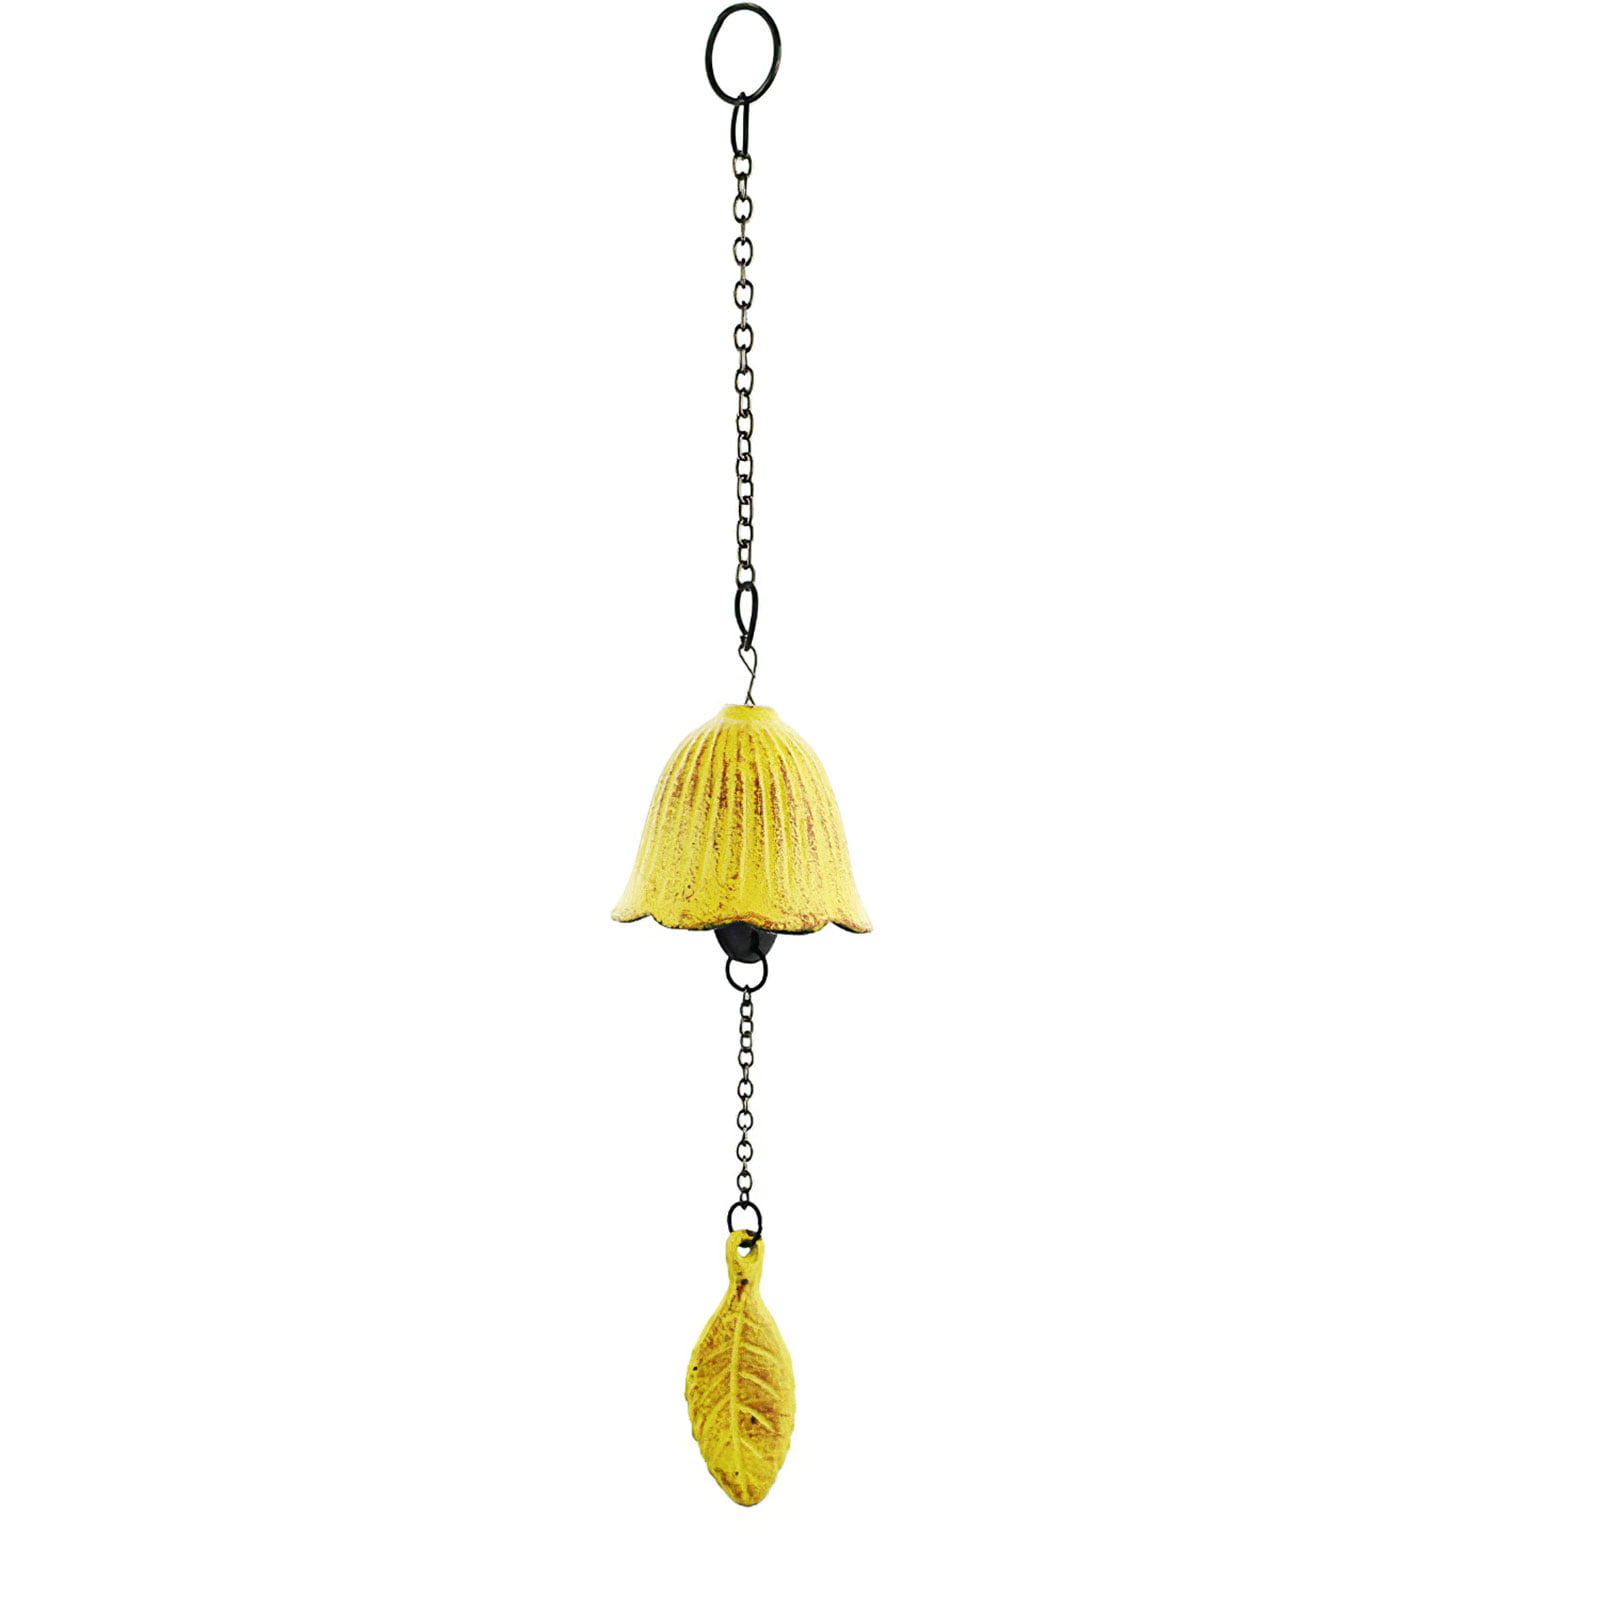 1 X Cast Iron Wind Chime Metal Leaf Small Bell Hanging Ornament Retro Home Decor 